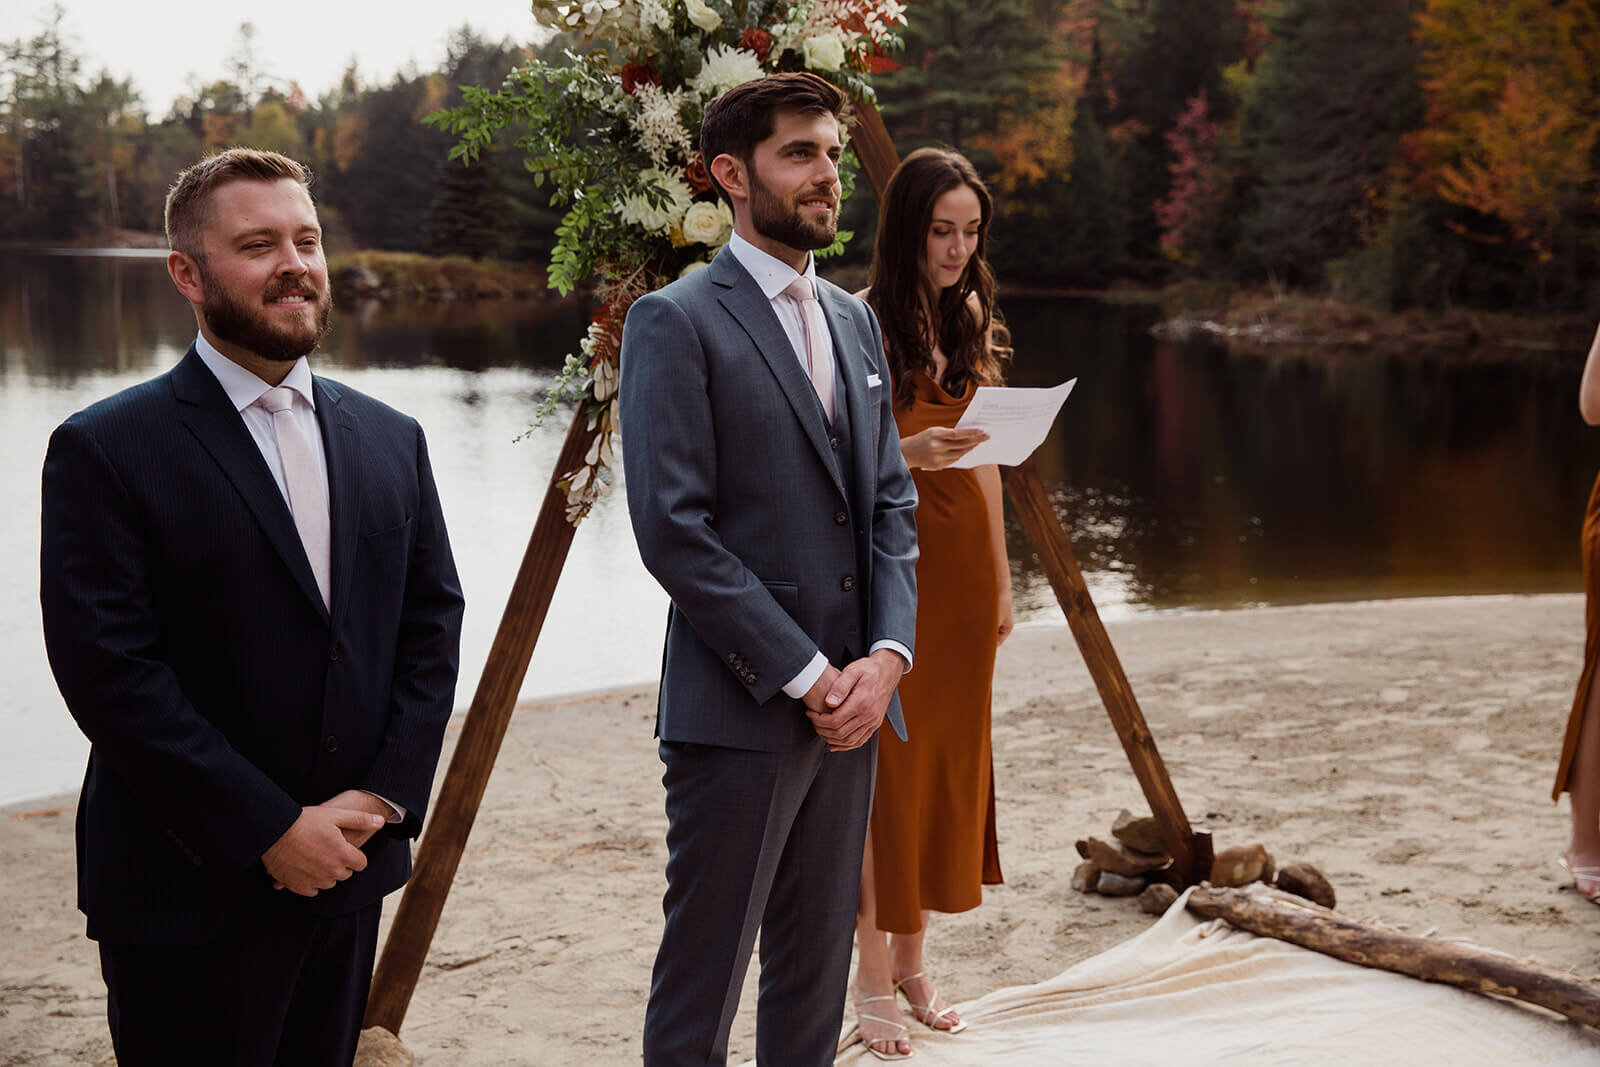  Groom sees bride walking down the aisle on the lake beach during their fall wedding in the Adirondacks in Upstate New York. 